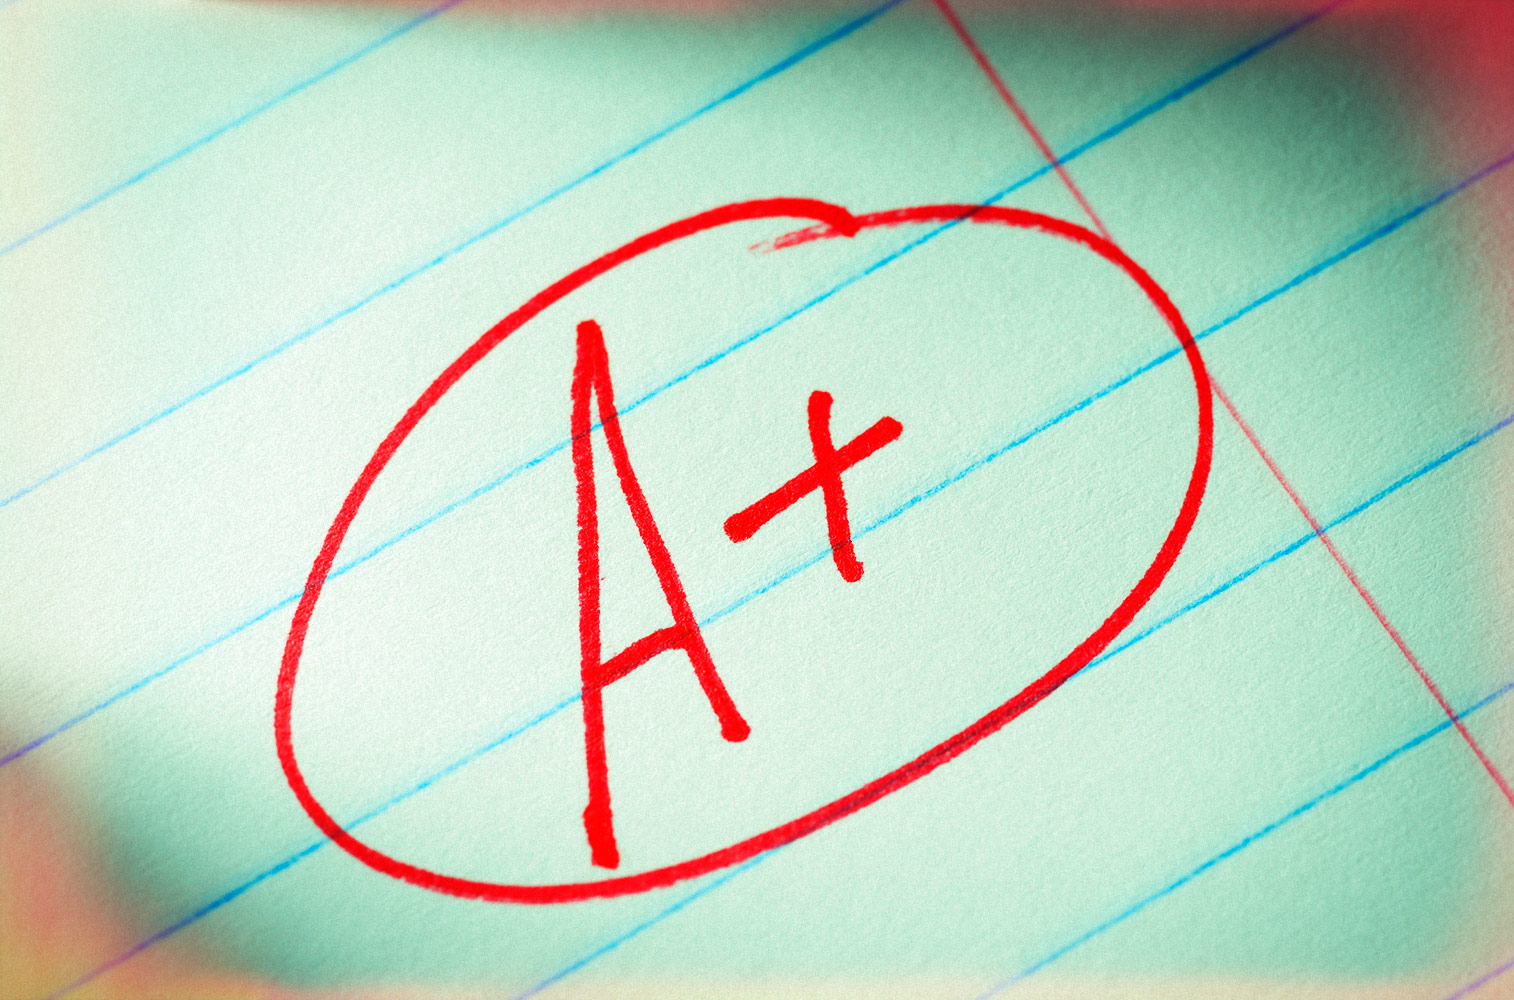 How Should Grade Point Averages Be Calculated for Academic Awards?